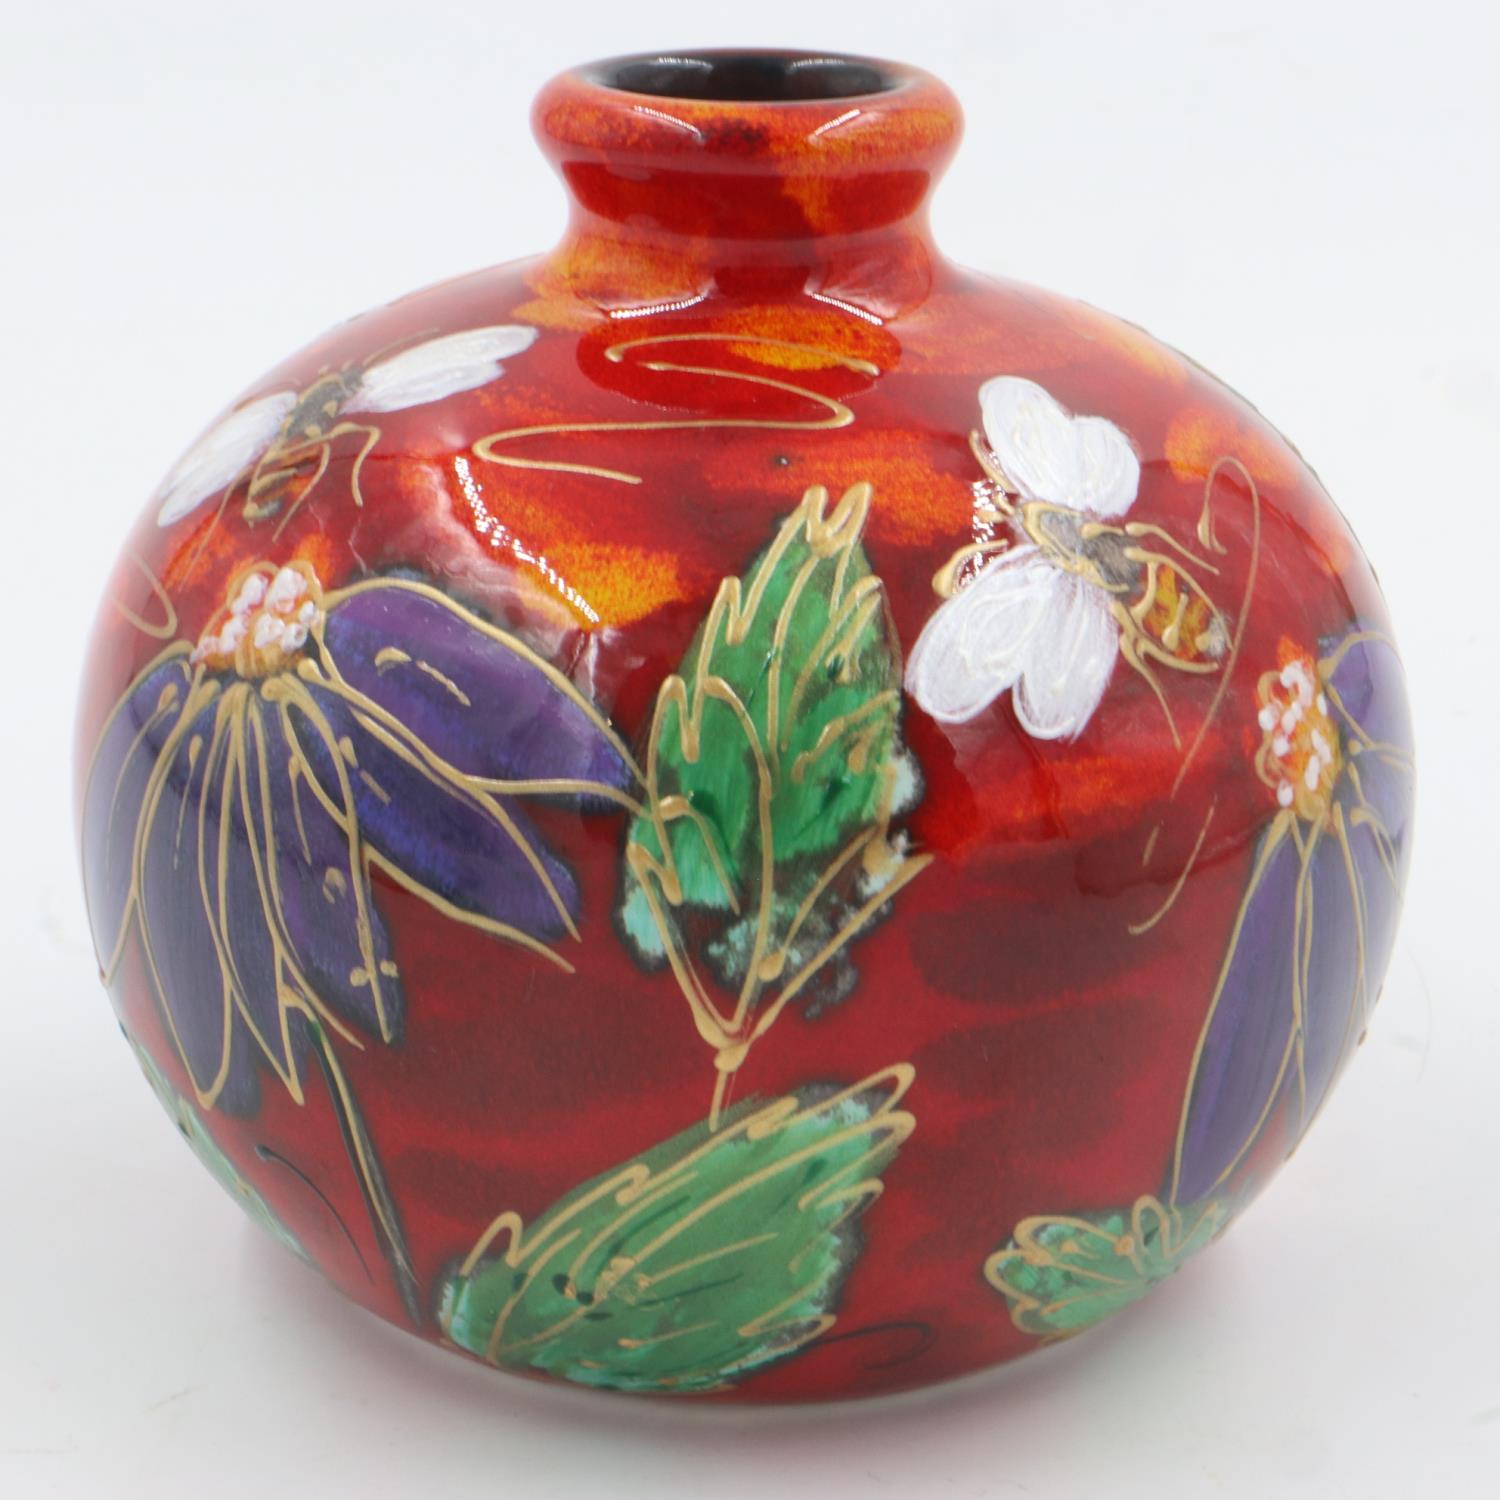 Anita Harris vase in the Bees pattern, signed in gold, H: 10 cm. UK P&P Group 1 (£16+VAT for the